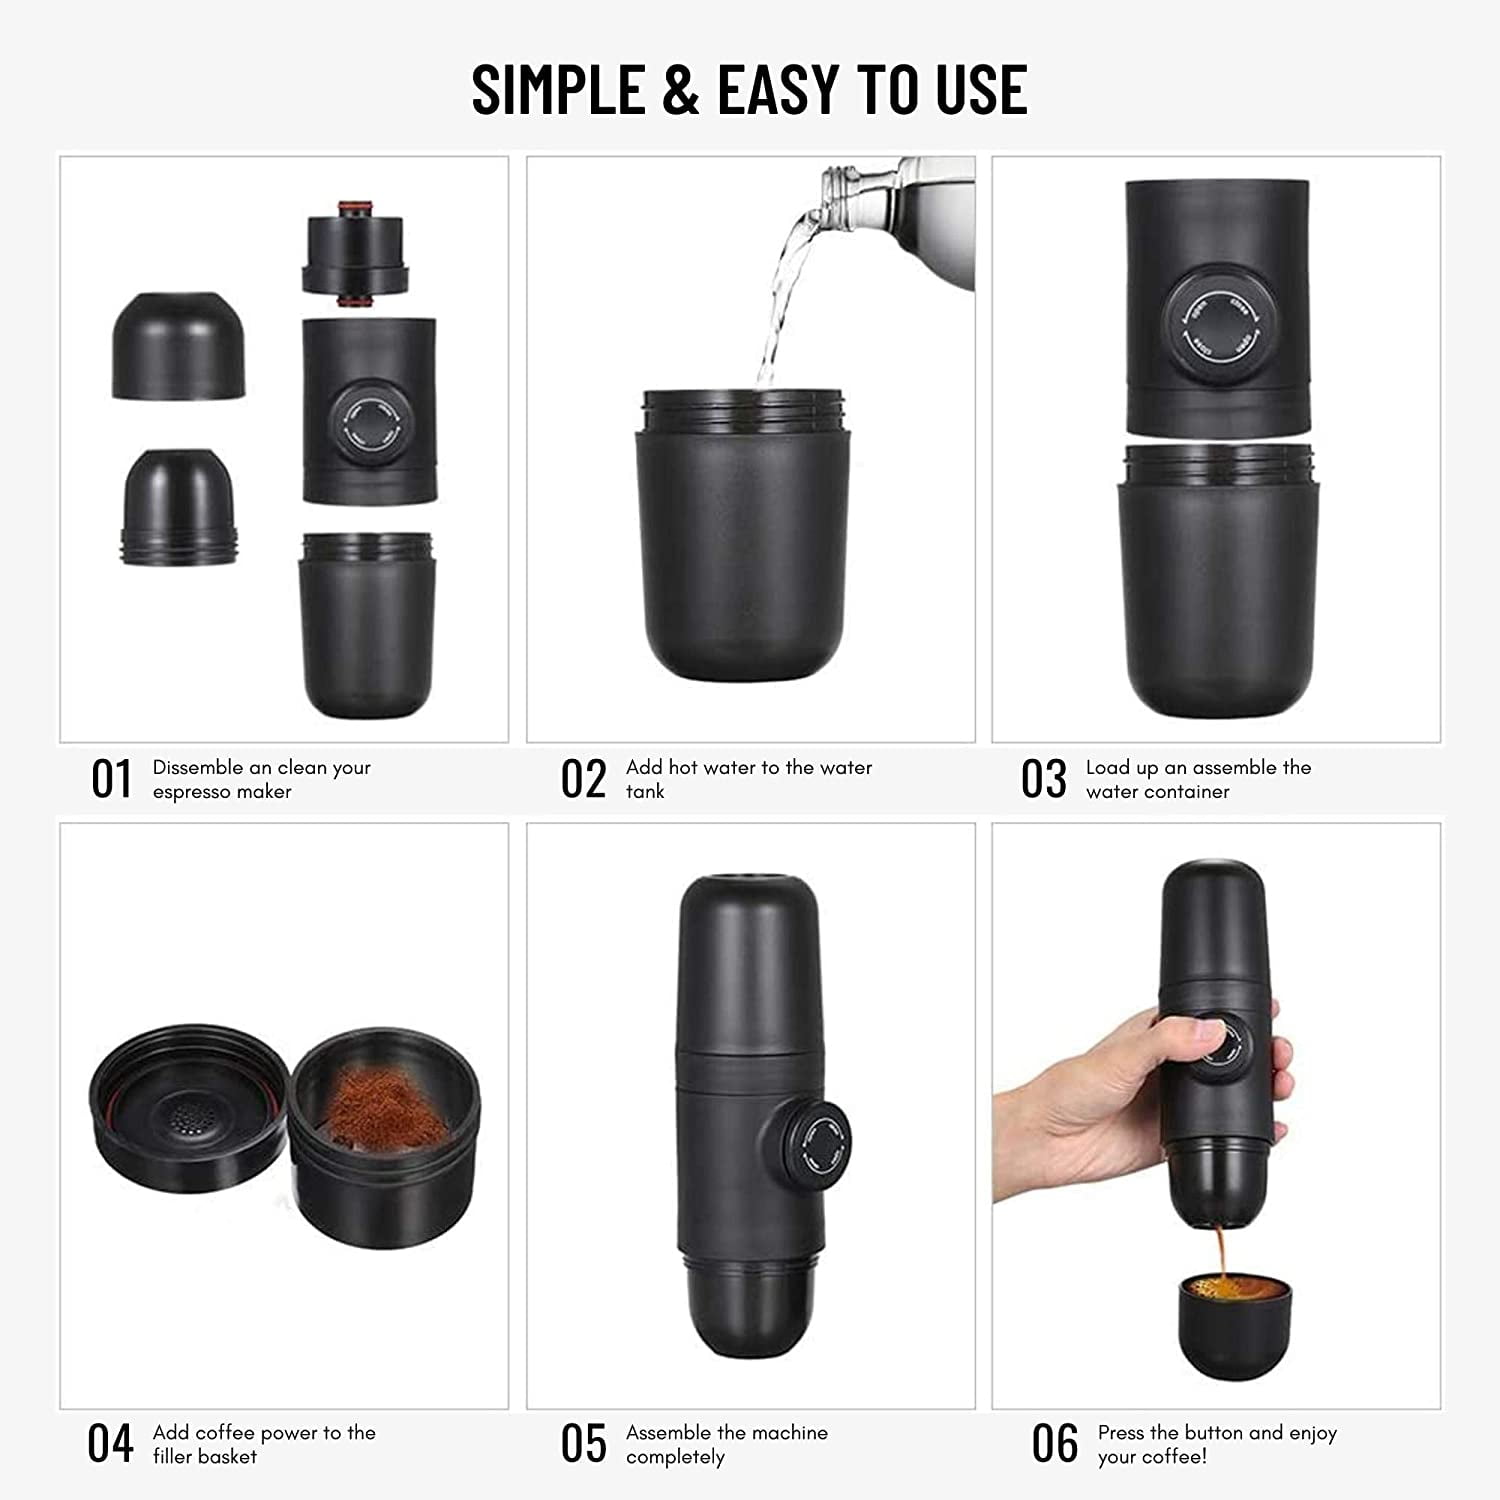 happyline Portable Espresso Machine and Coffee Maker, manually Operated, Handheld size, Perfect for Traveling, Hiking and Camping, Black, Size: 7.87 x